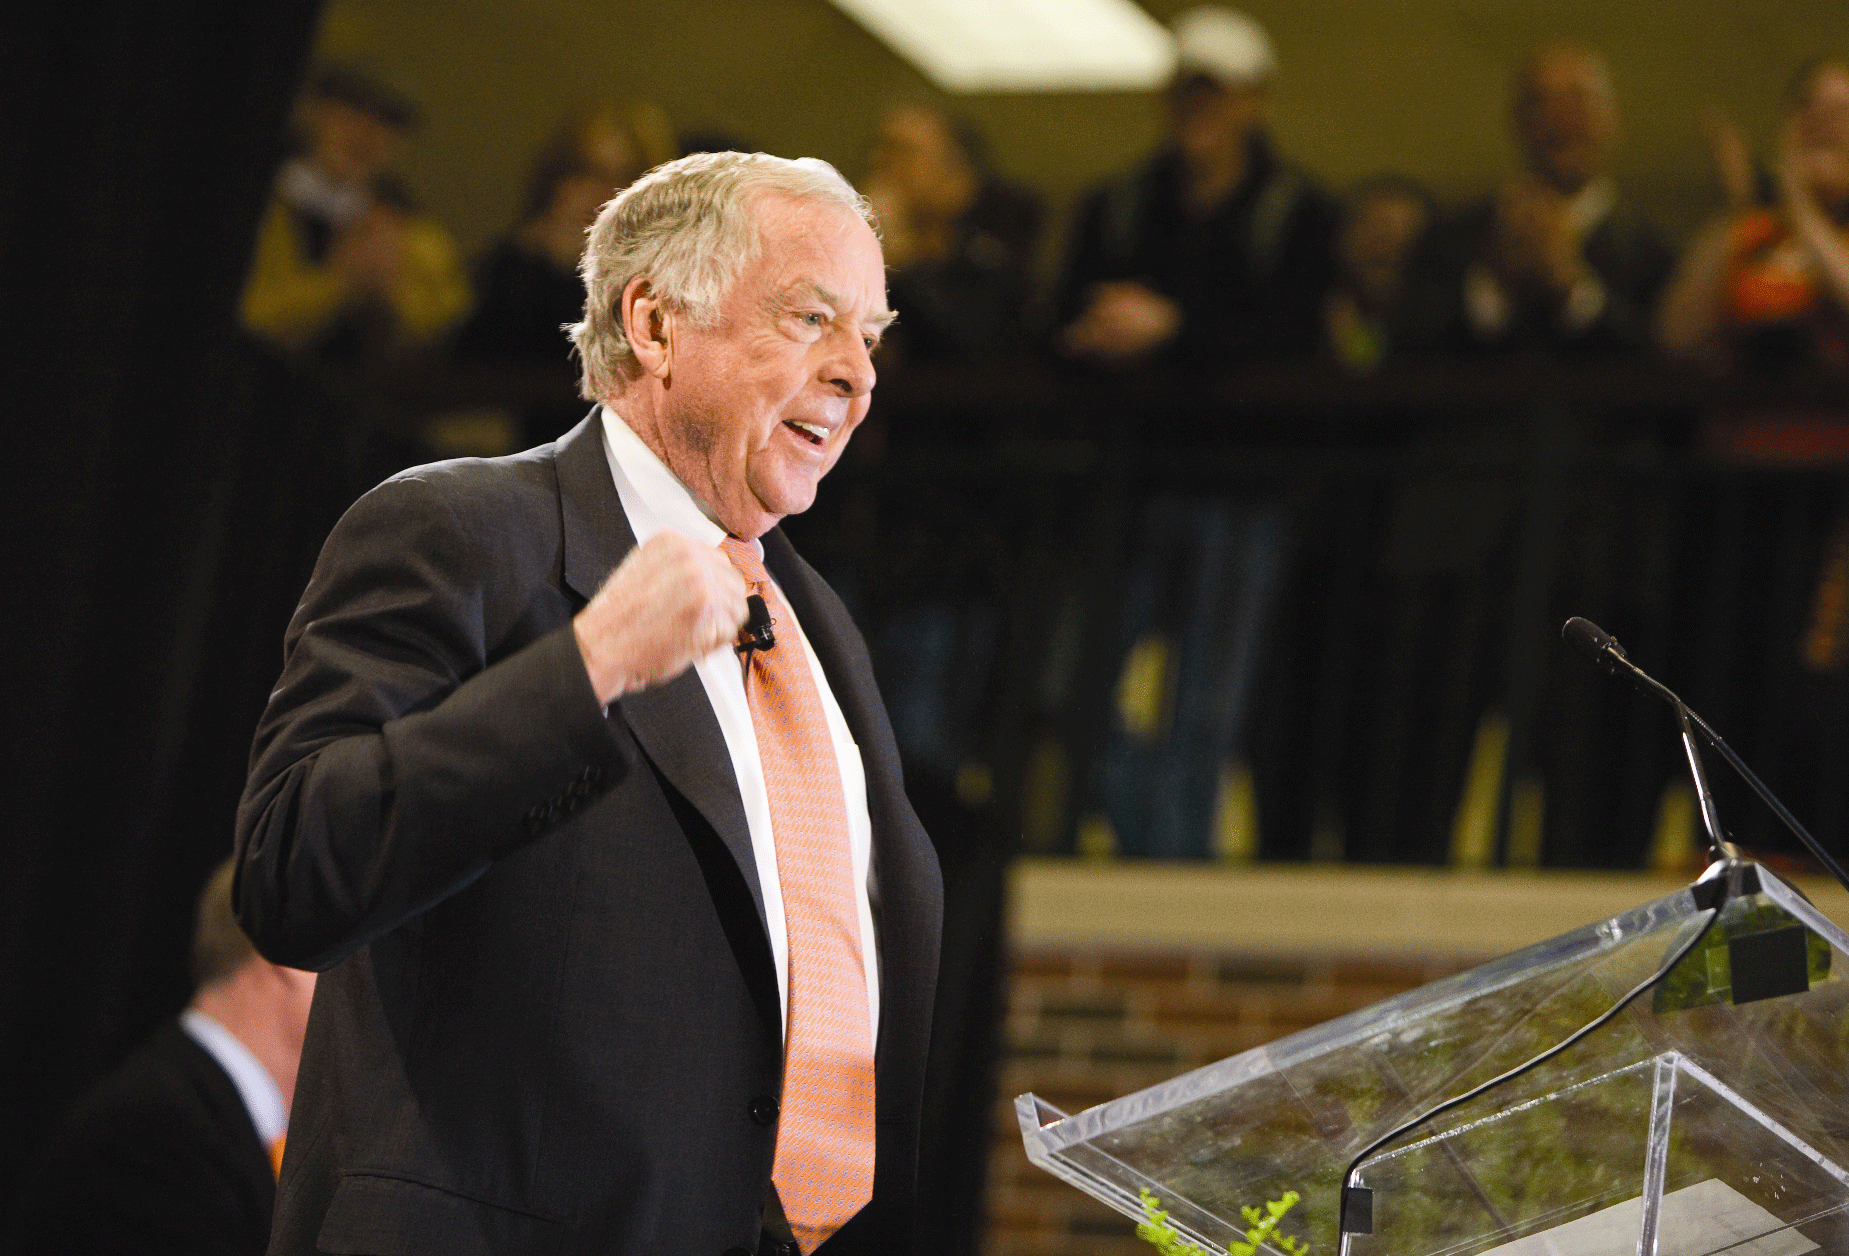 Energy leader and Oklahoma State University alumnus T. Boone Pickens announces a $100 million donation to Branding Success: The Campaign for Oklahoma State University on Feb. 26, 2010. Pickens’ gift created the Pickens Legacy Scholarship Match, which has led to $191.5 million in commitments for student support.